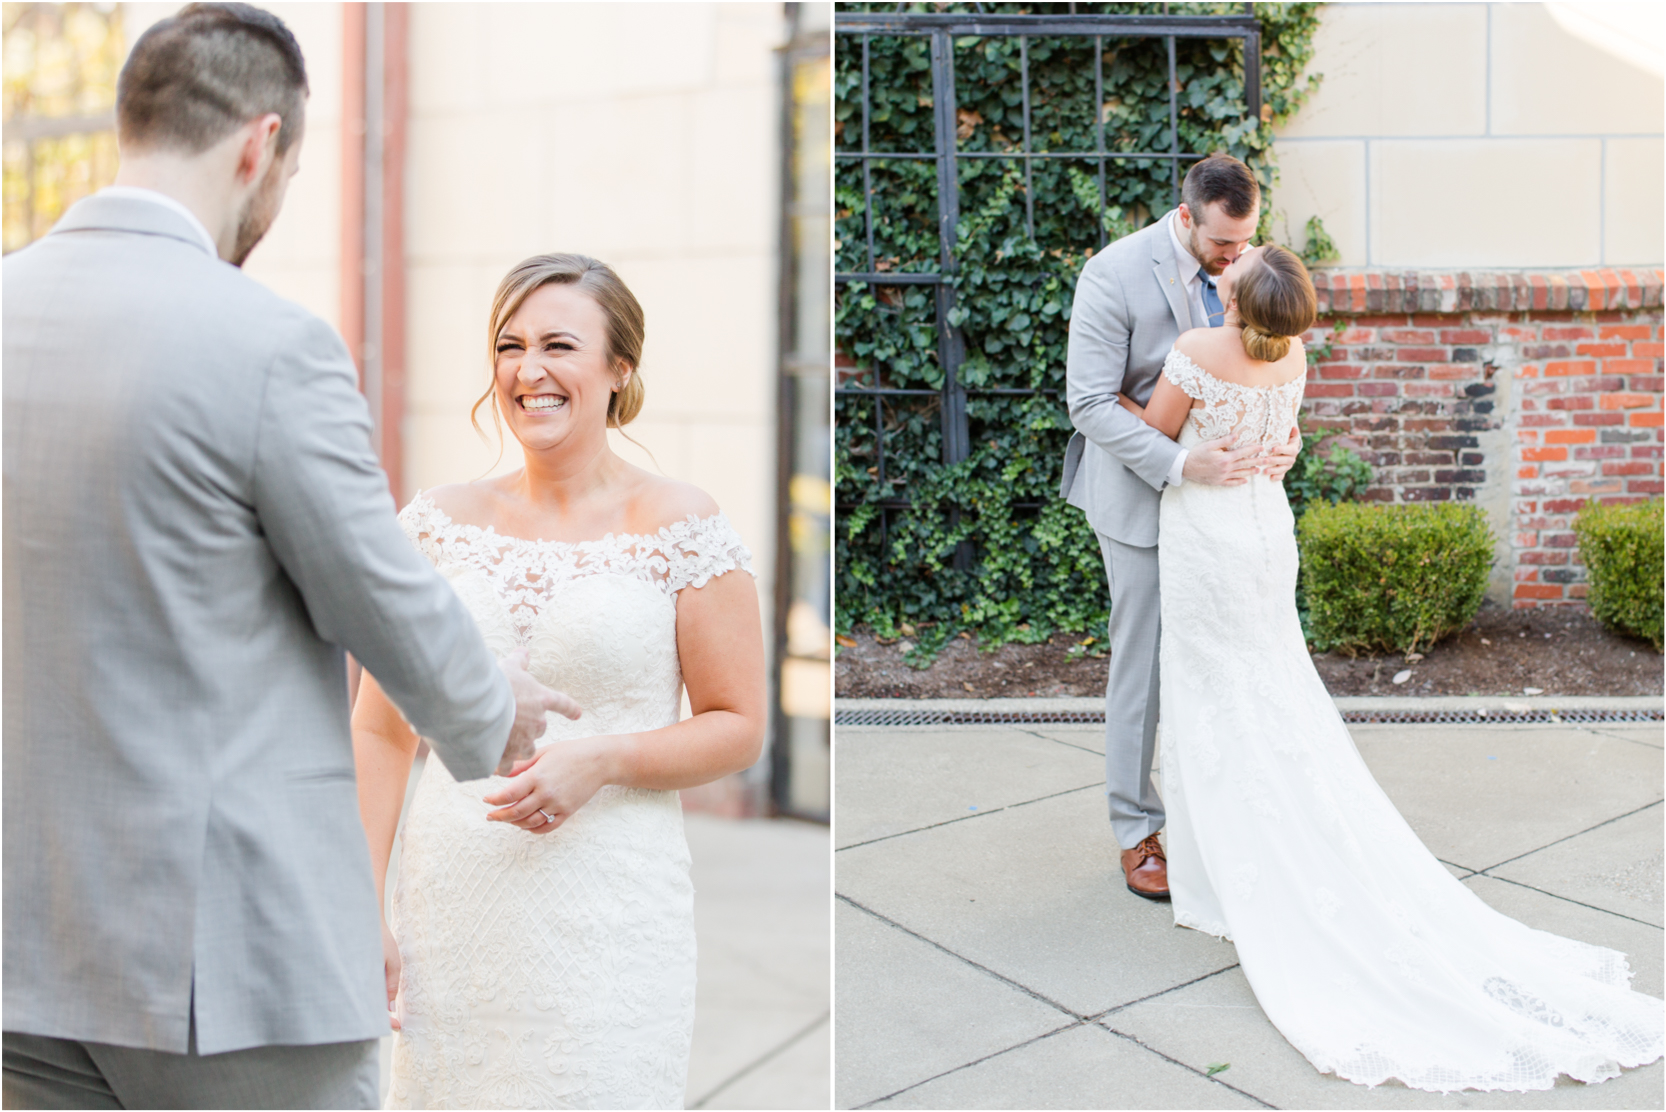 Bride Groom First Look Wedding Photography Pictures Mellwood Art Center